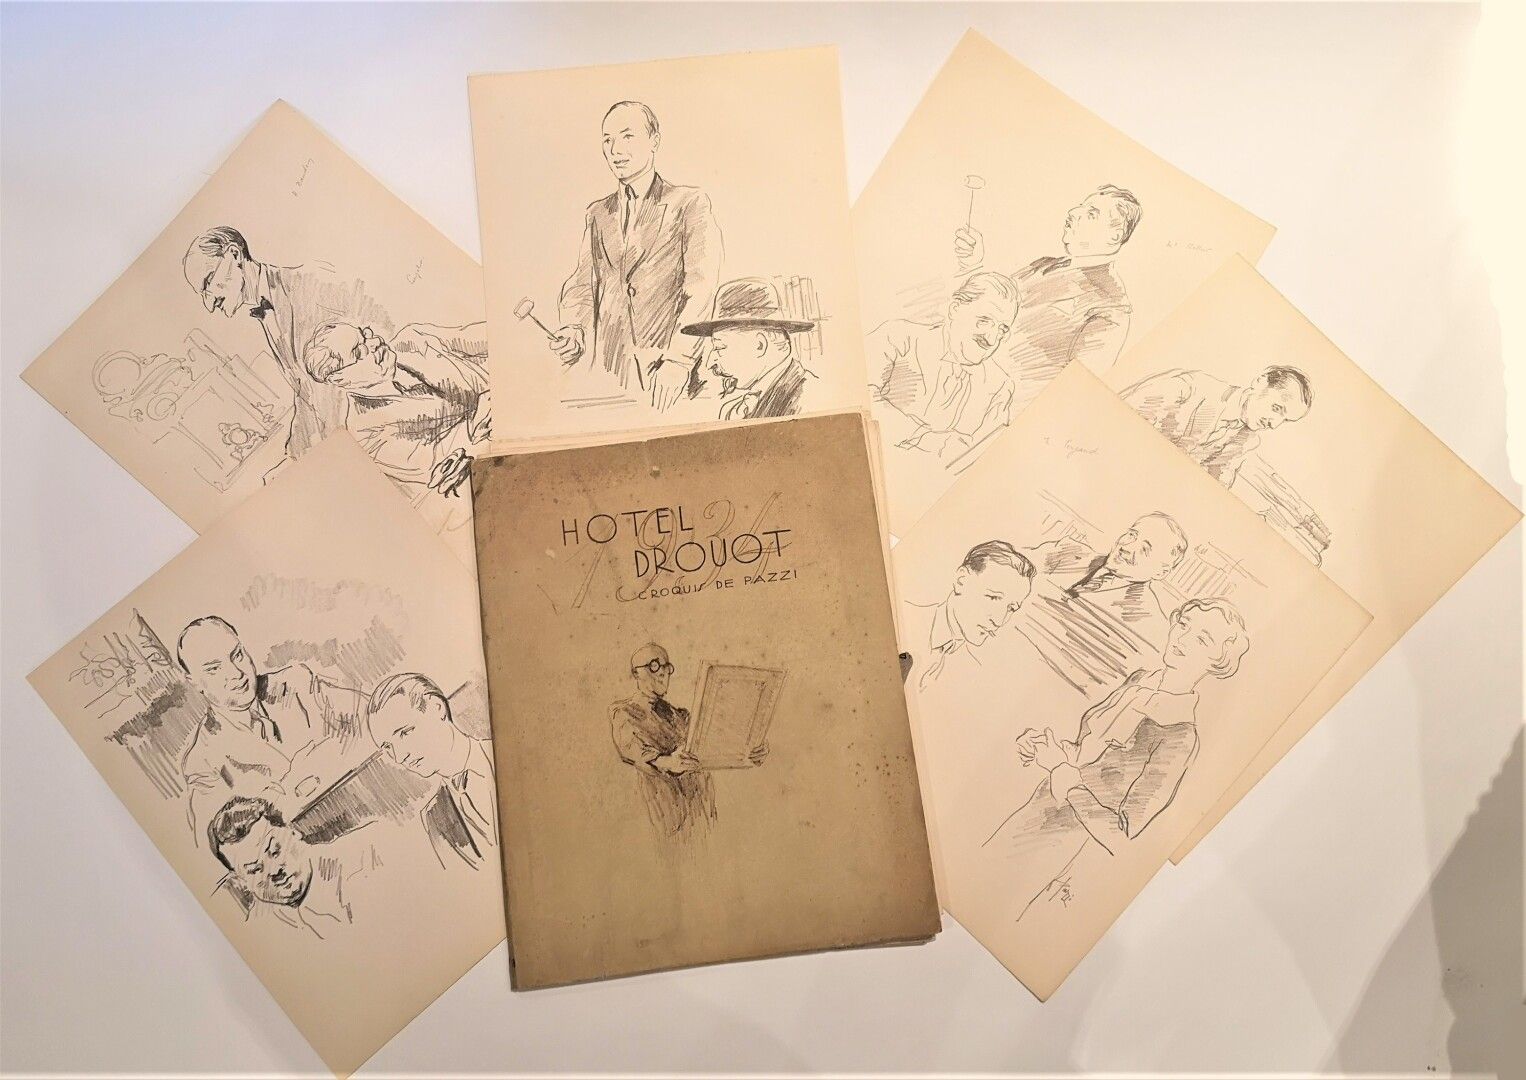 Null PAZZI (after)

Hotel Drouot 1934

Set of reproductions of sketches of aucti&hellip;